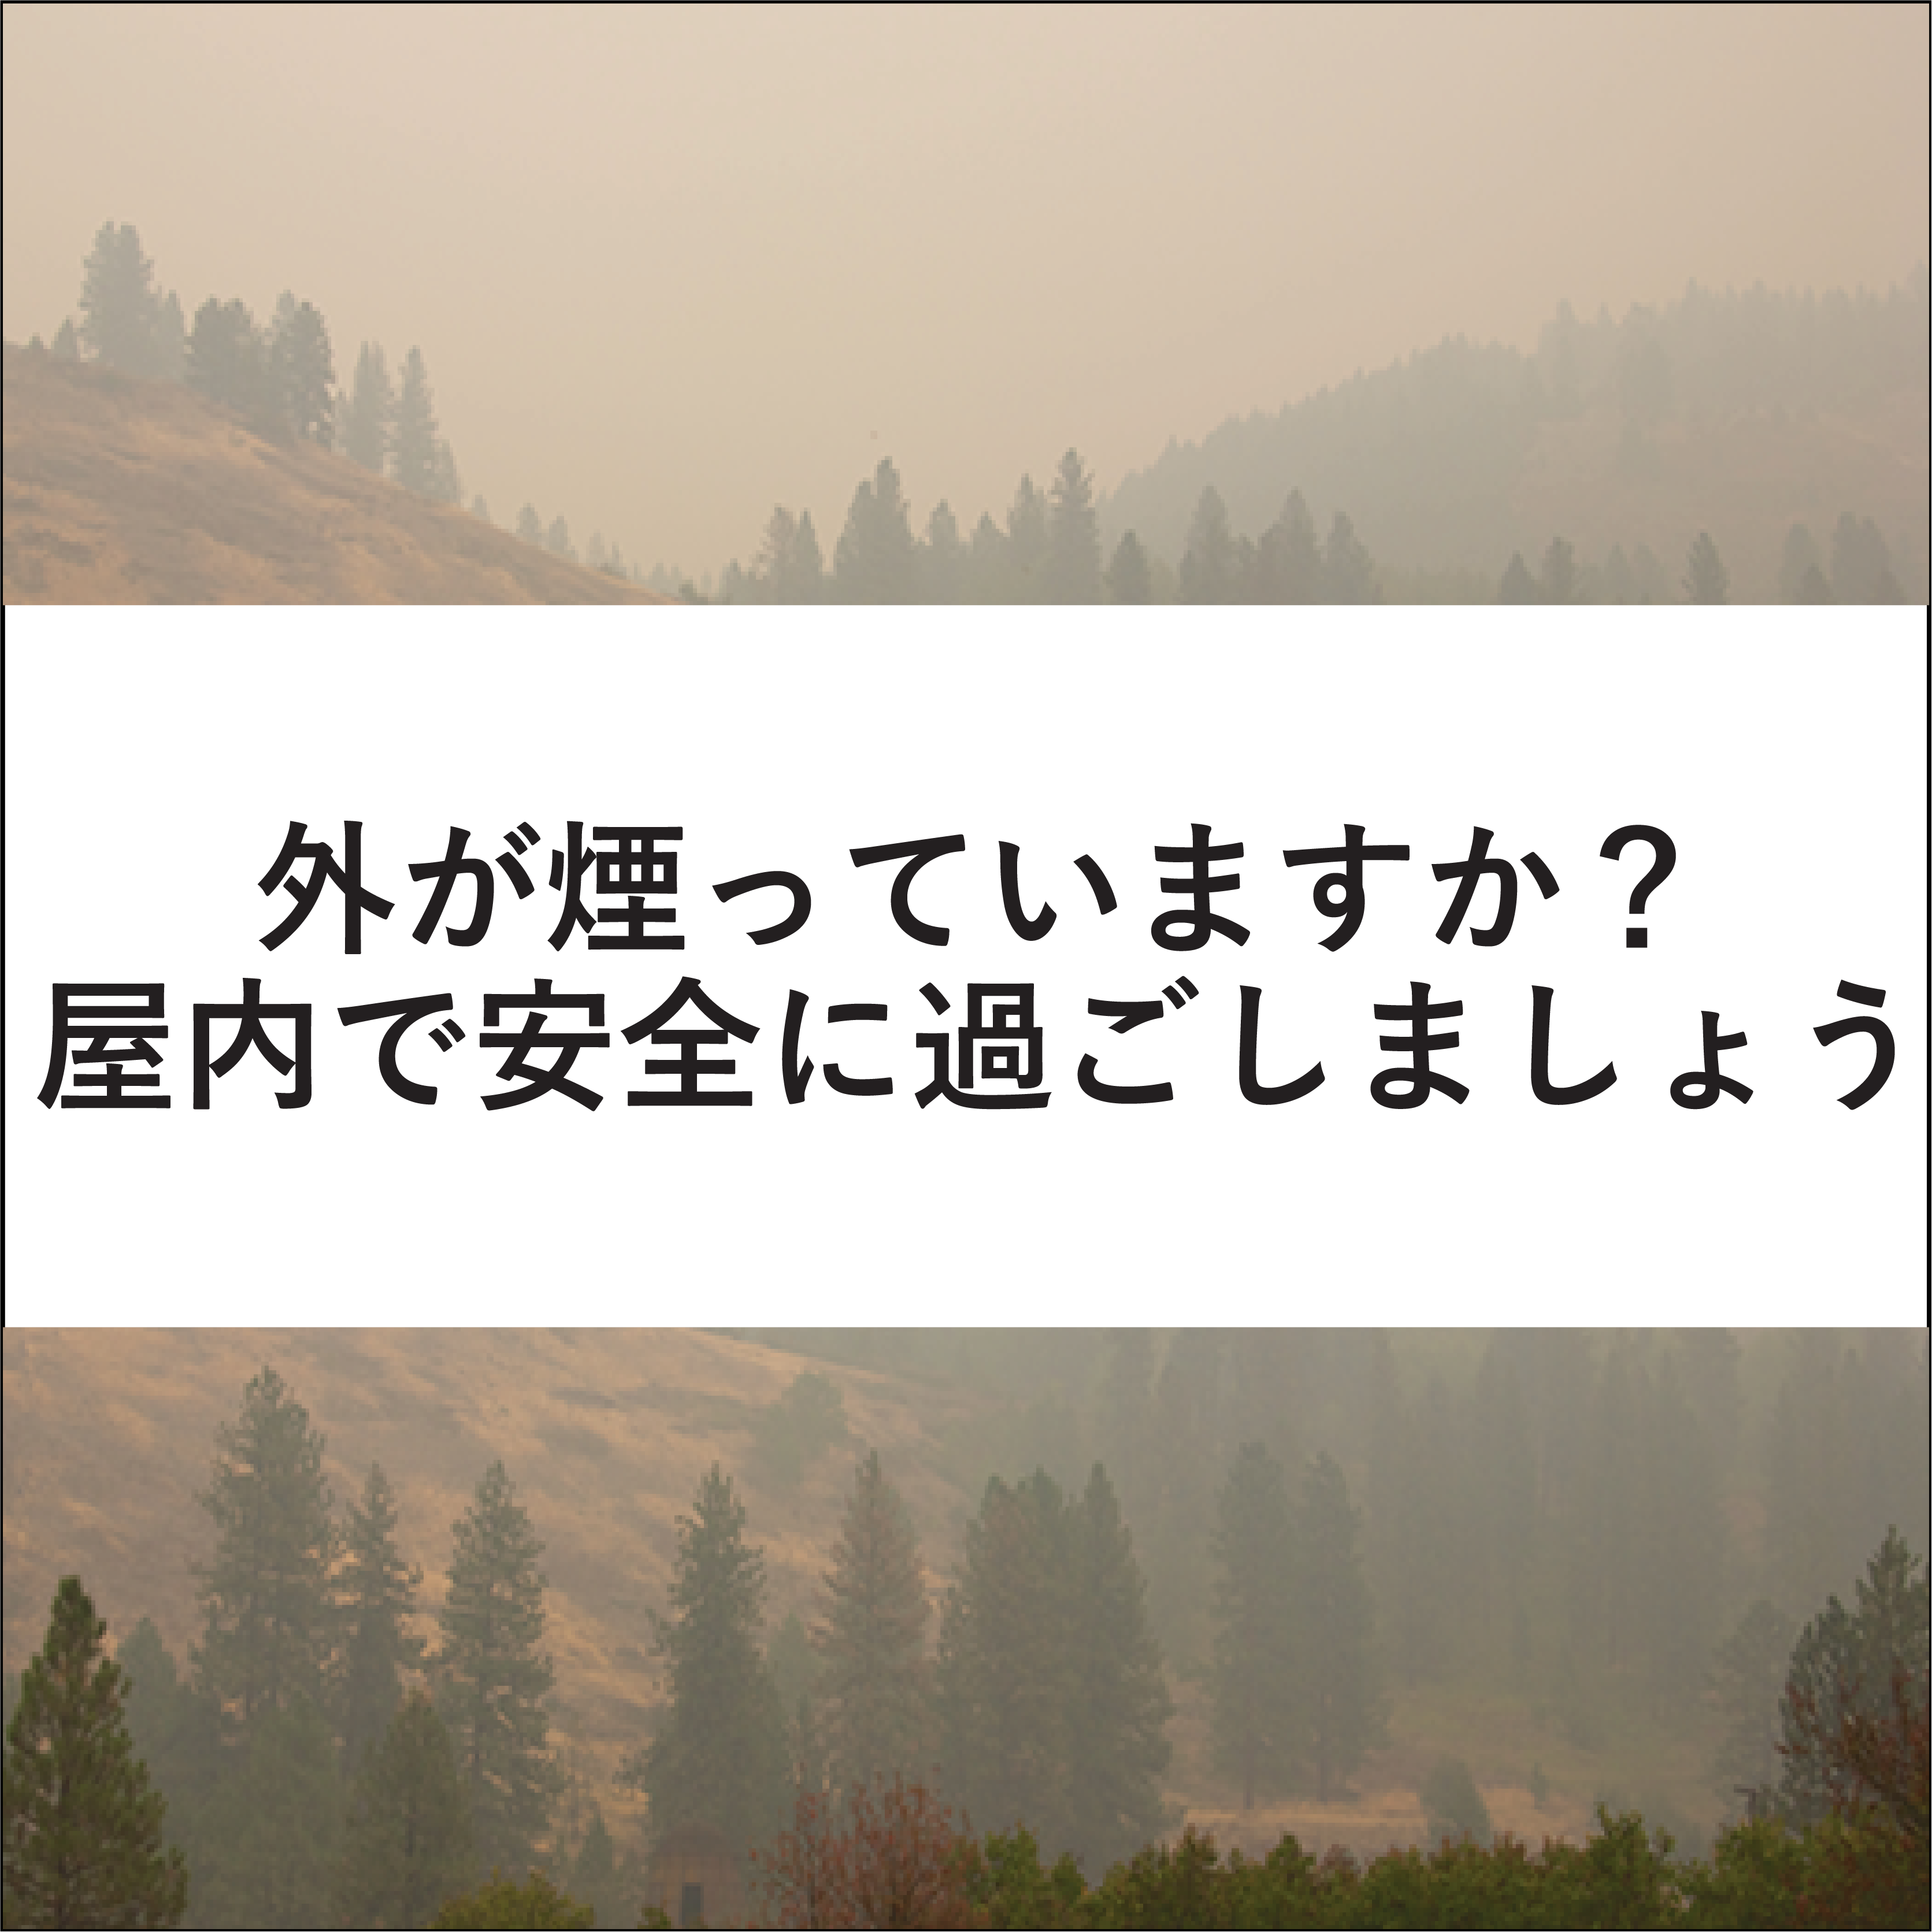 Stay Safe from Smoke in Japanese